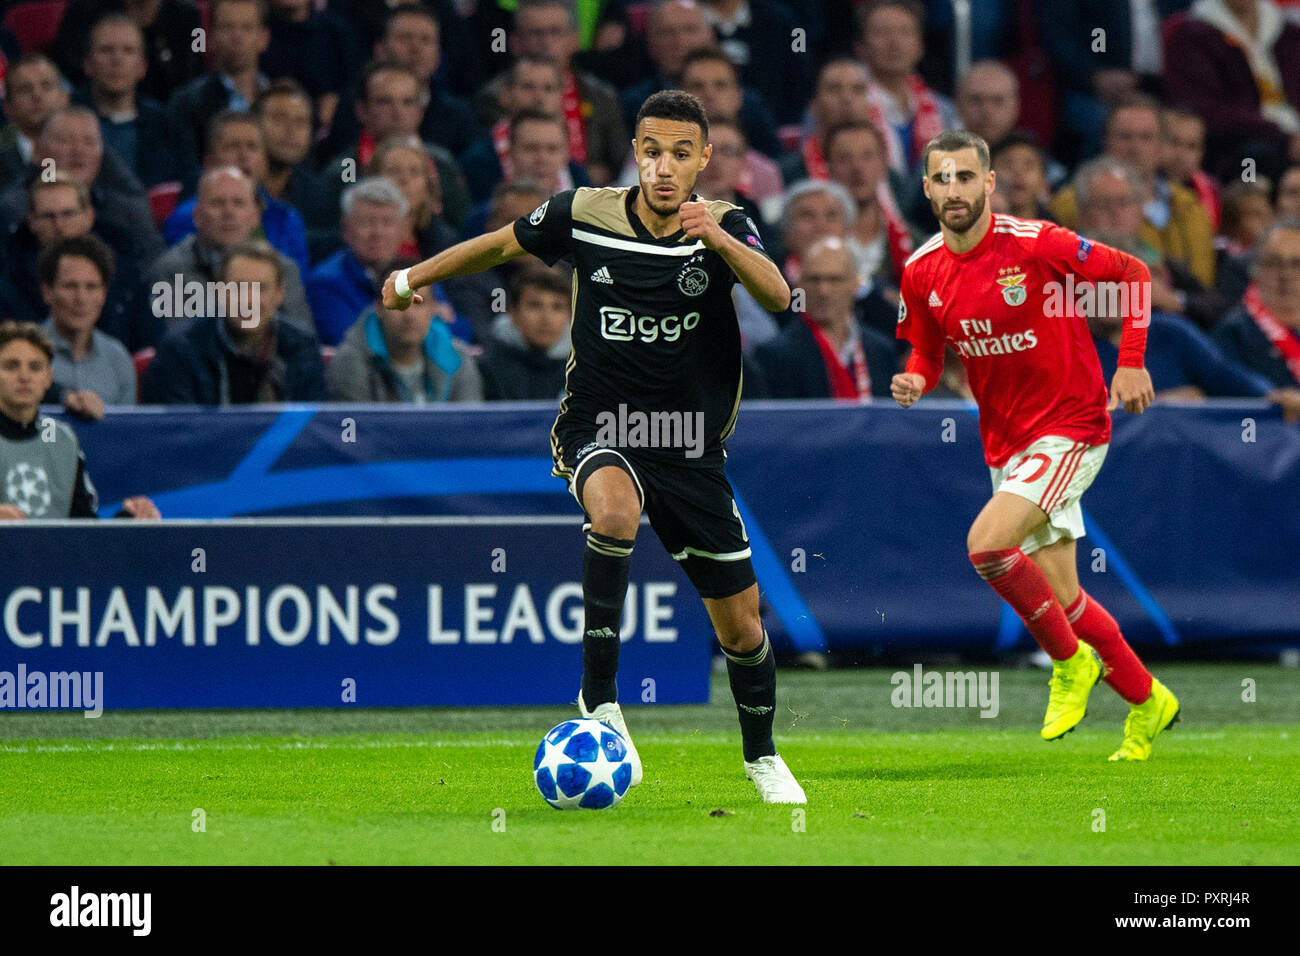 Amsterdam, Netherlands. 23rd October, 2018. 23-10-2018: Voetbal: Ajax v Benfica: Amsterdam Champions League 2018-2019 Noussair Mazraoui of Ajax, Rafa Silva of Benfica Credit: Orange Pictures/Alamy Live News Stock Photo